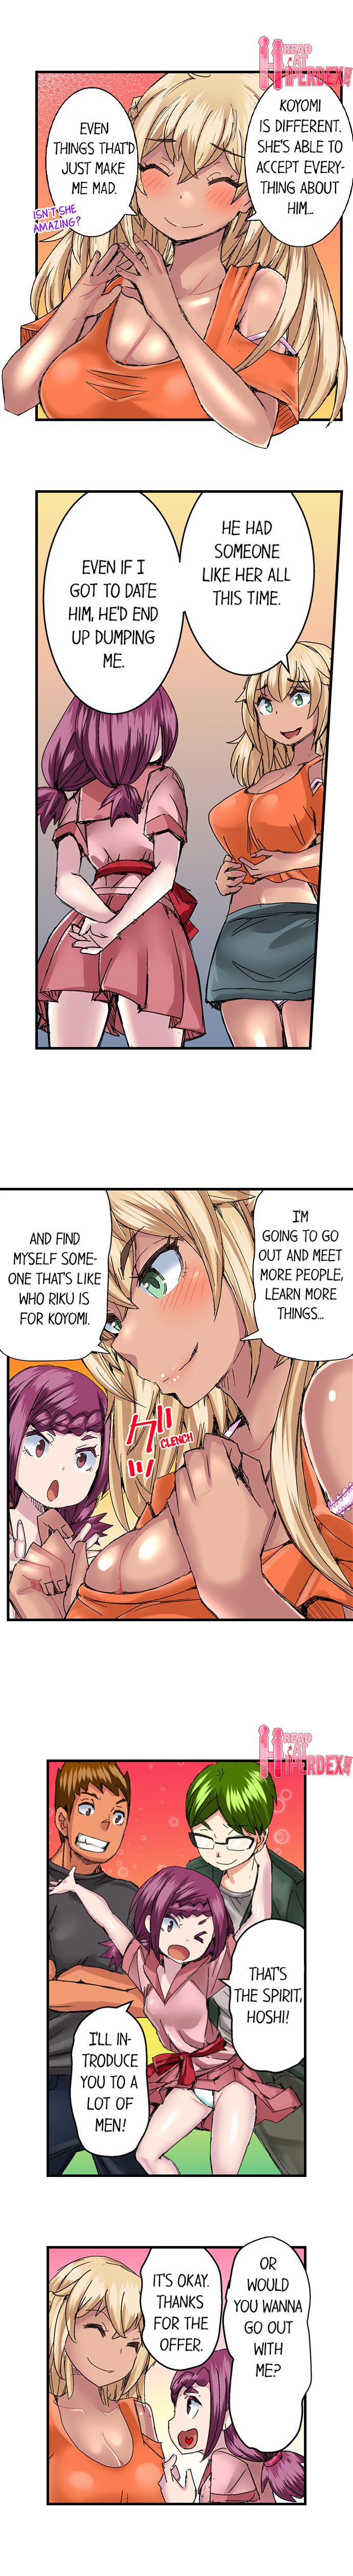 Taking a Hot Tanned Chick’s Virginity - Chapter 39 Page 9